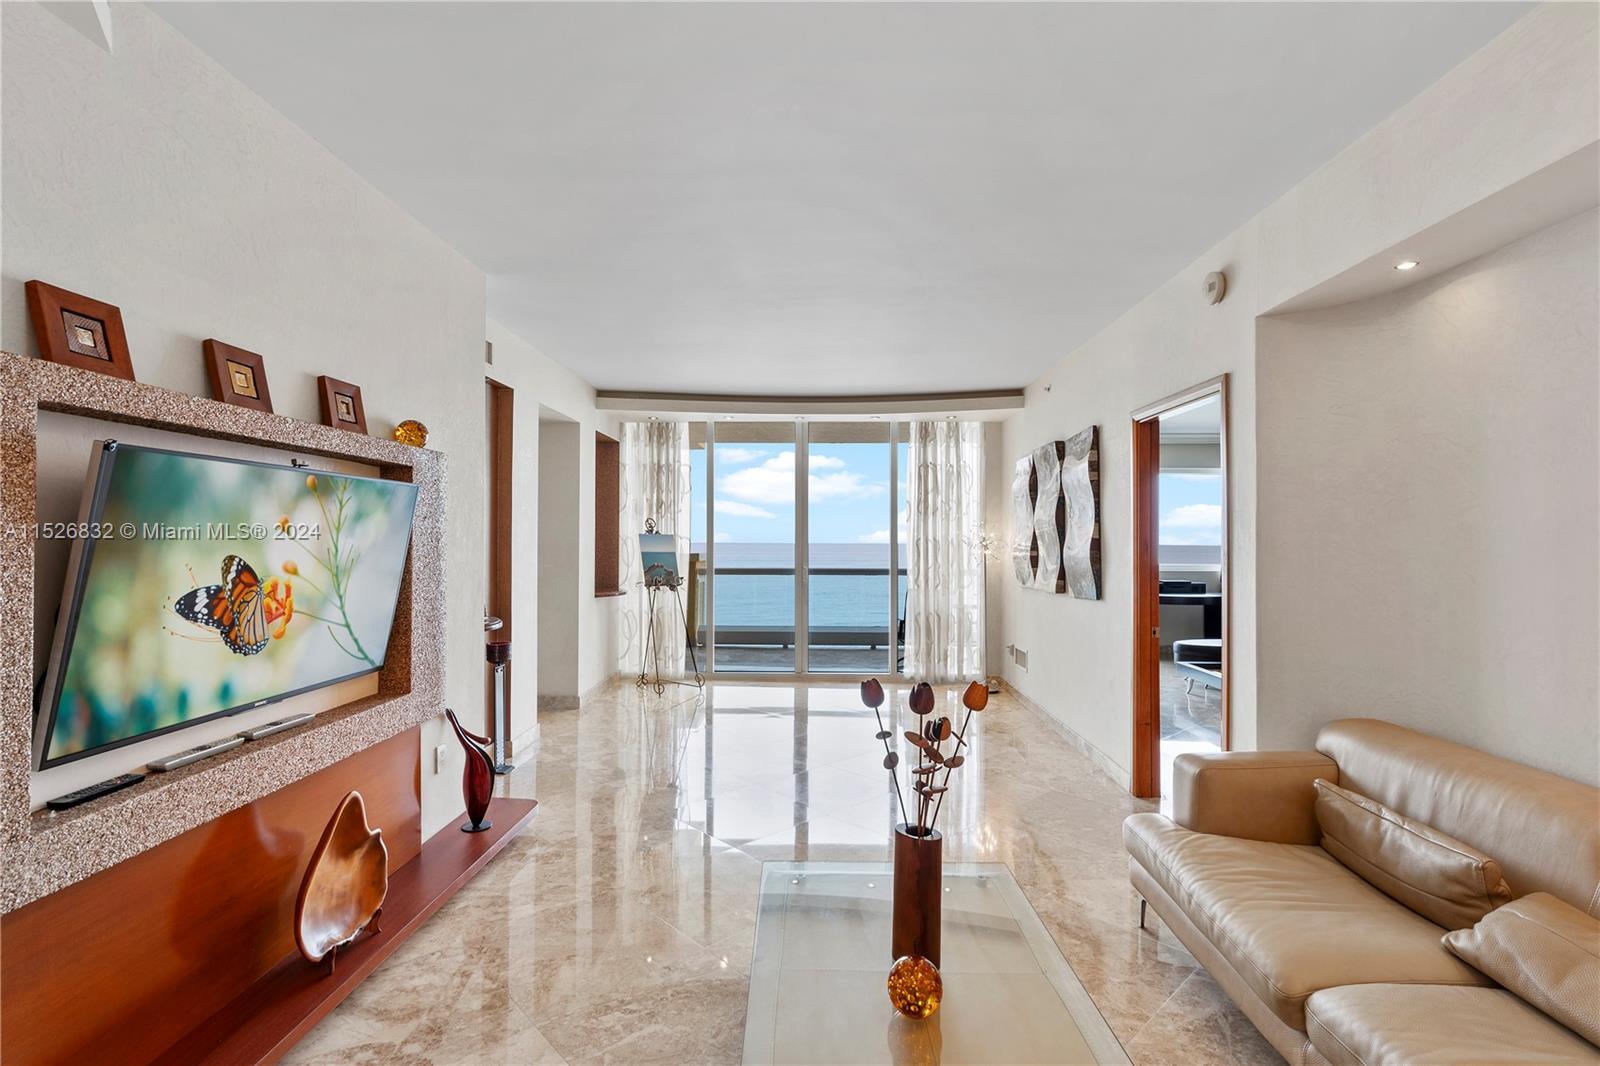 Discover luxury living at its finest! This exquisite 3-bed, 3-bath unit at Acqualina Ocean Residence